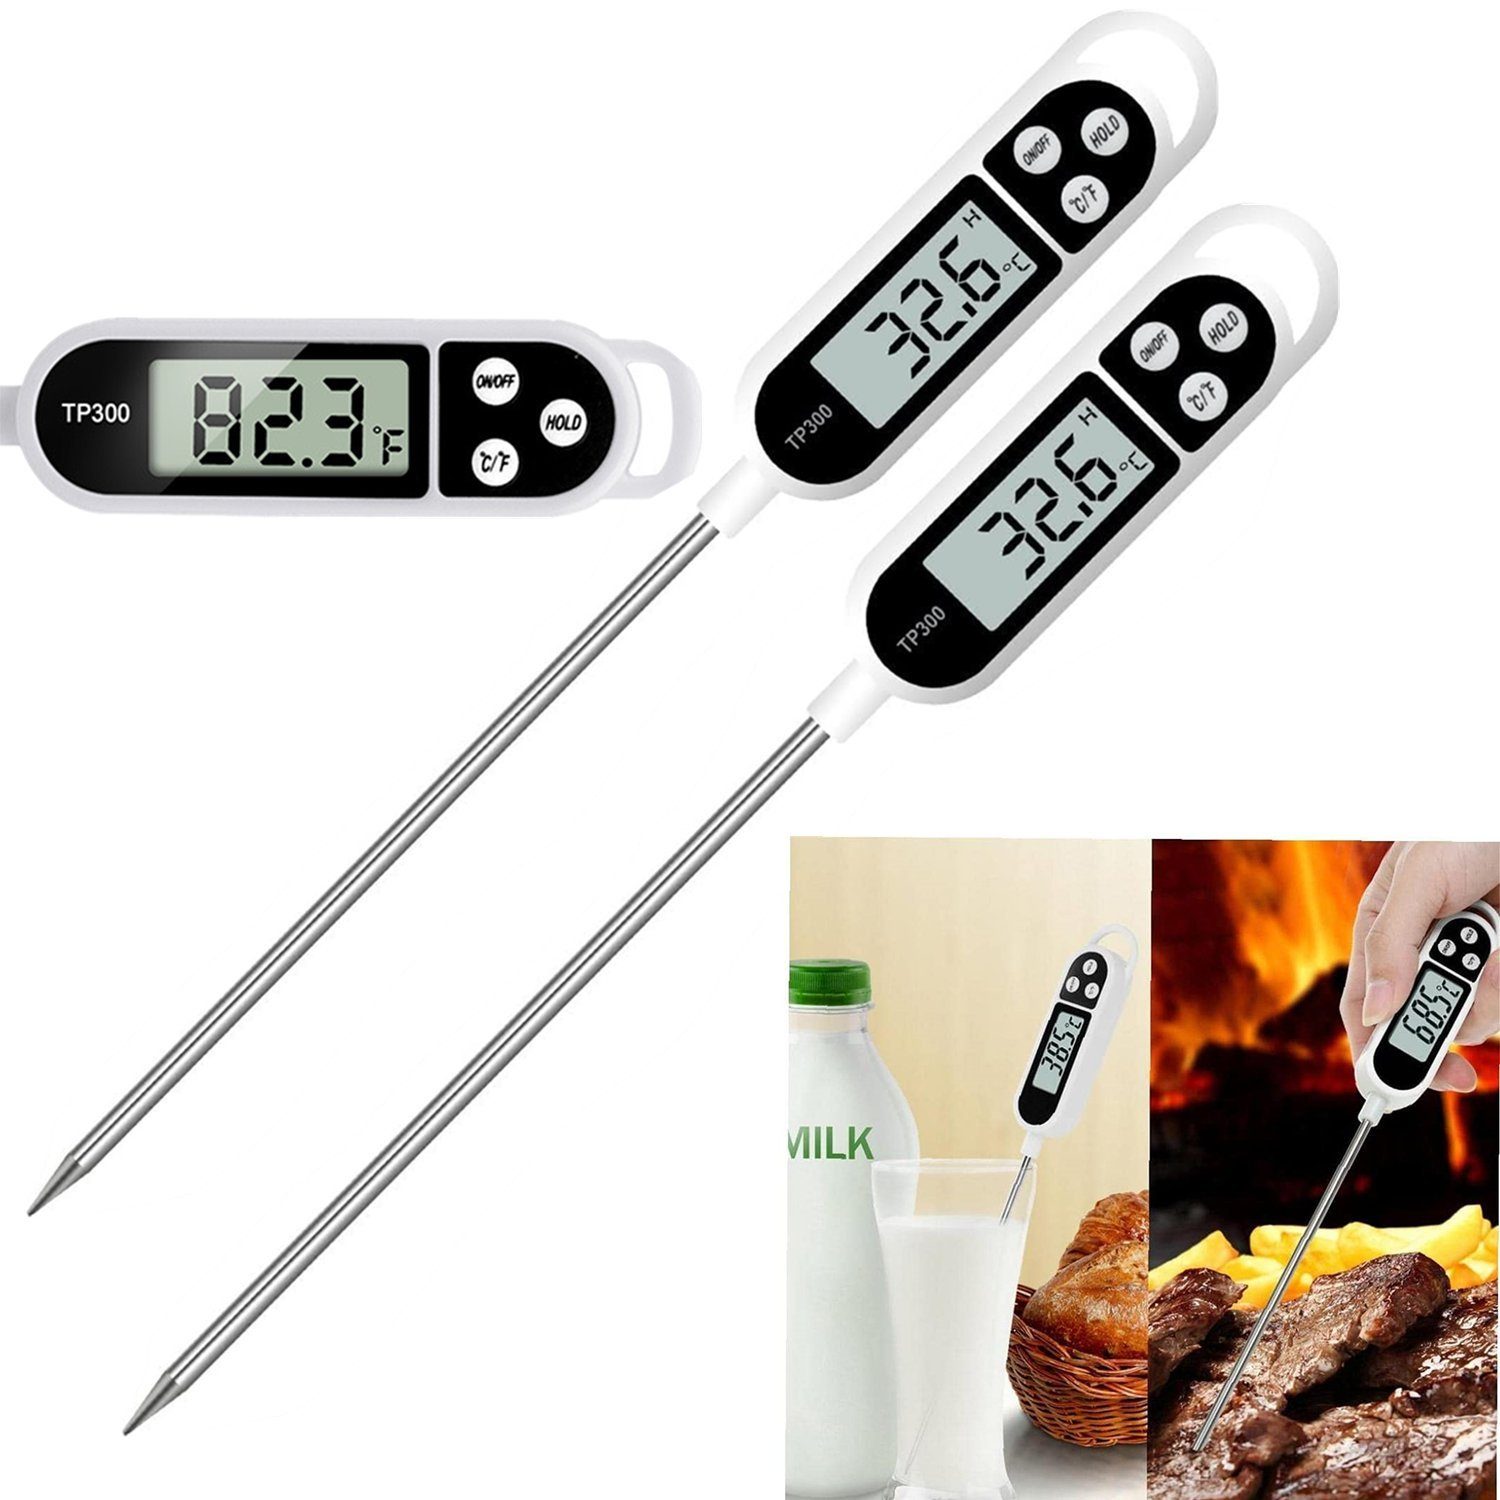 Analoges Braten- / Ofenthermometer